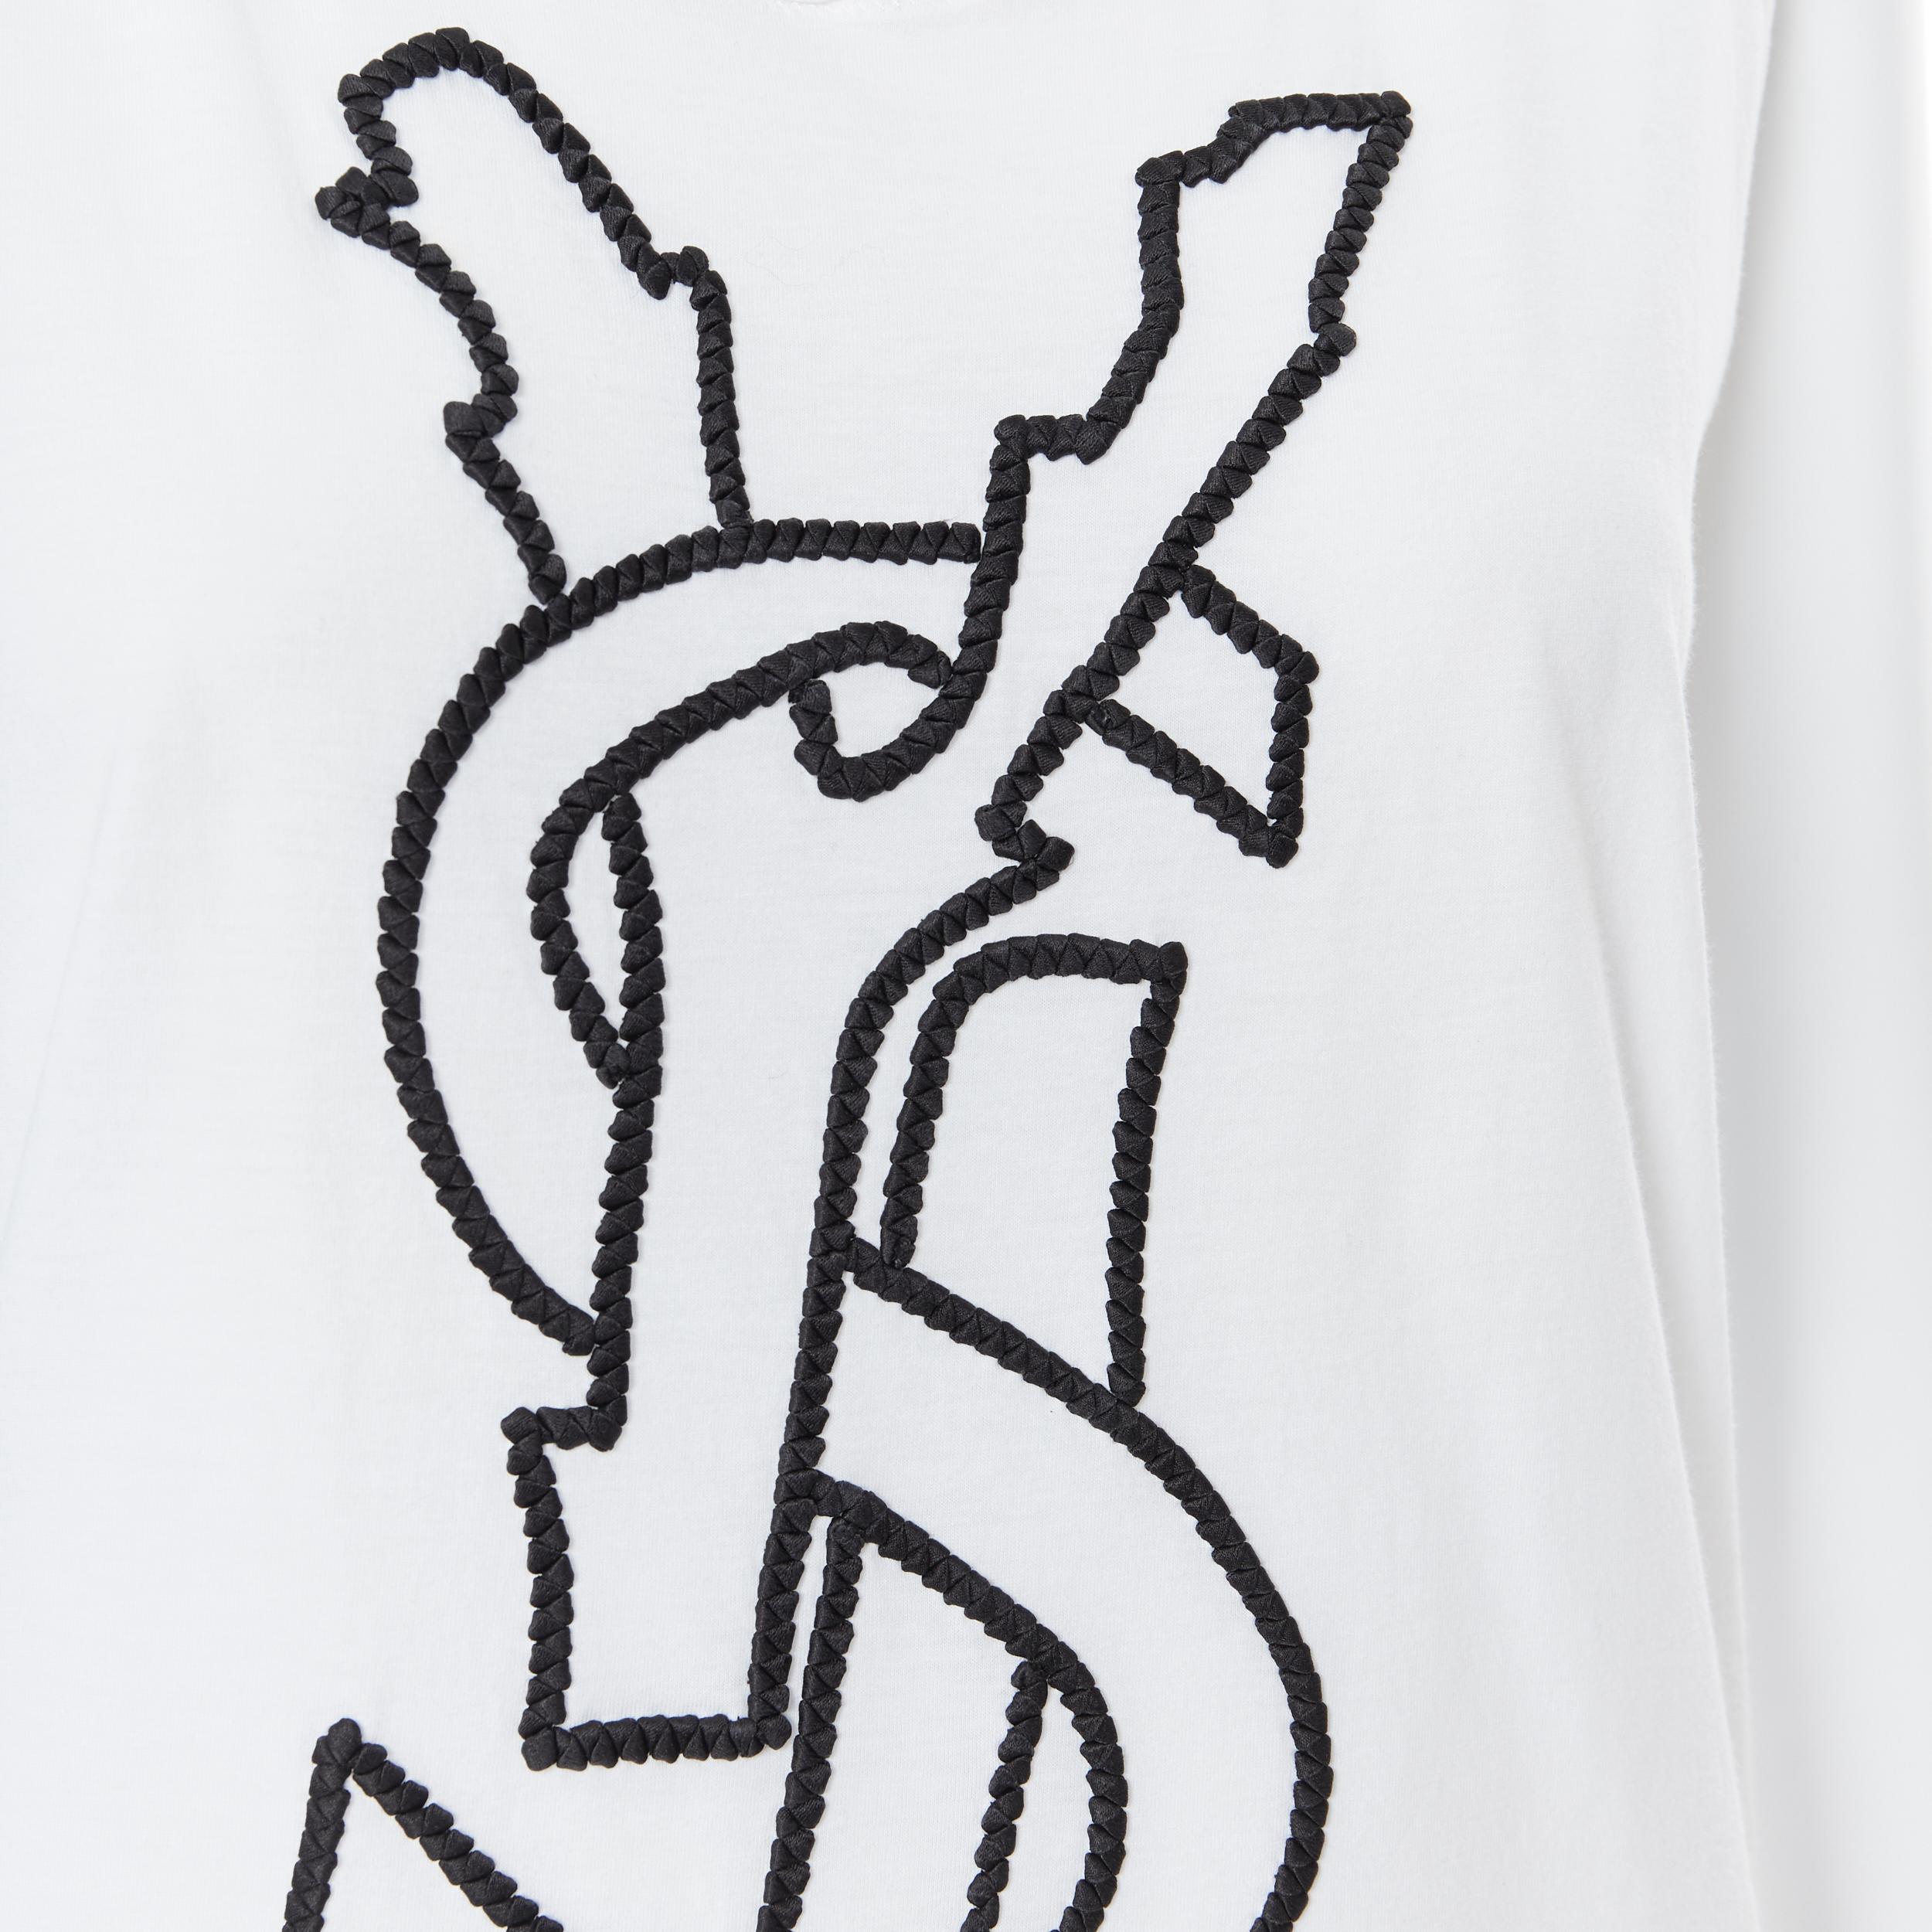 YVES SAINT LAURENT white cotton YSL logo embroidery sleeveless tank top FR42
Brand: Yves Saint Laurent
Designer: Stefano Pilati
Collection: SS10 
Model Name / Style: Cotton tank top
Material: Cotton
Color: White
Pattern: Solid
Extra Detail: